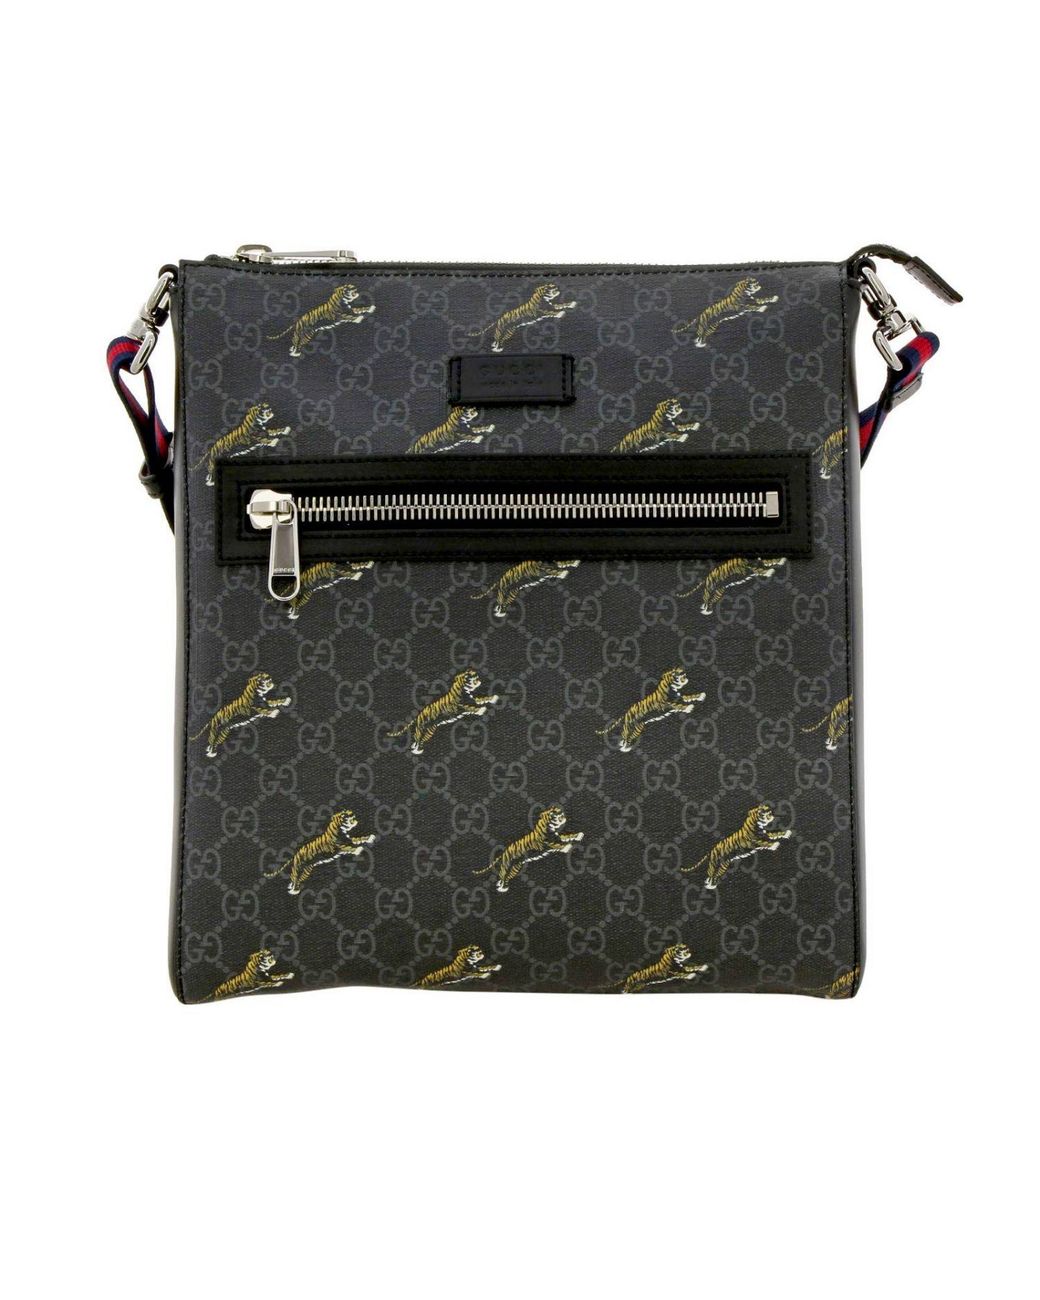 Gucci Leather Bag With All-over Tiger Print And GG Monogram in Black ...